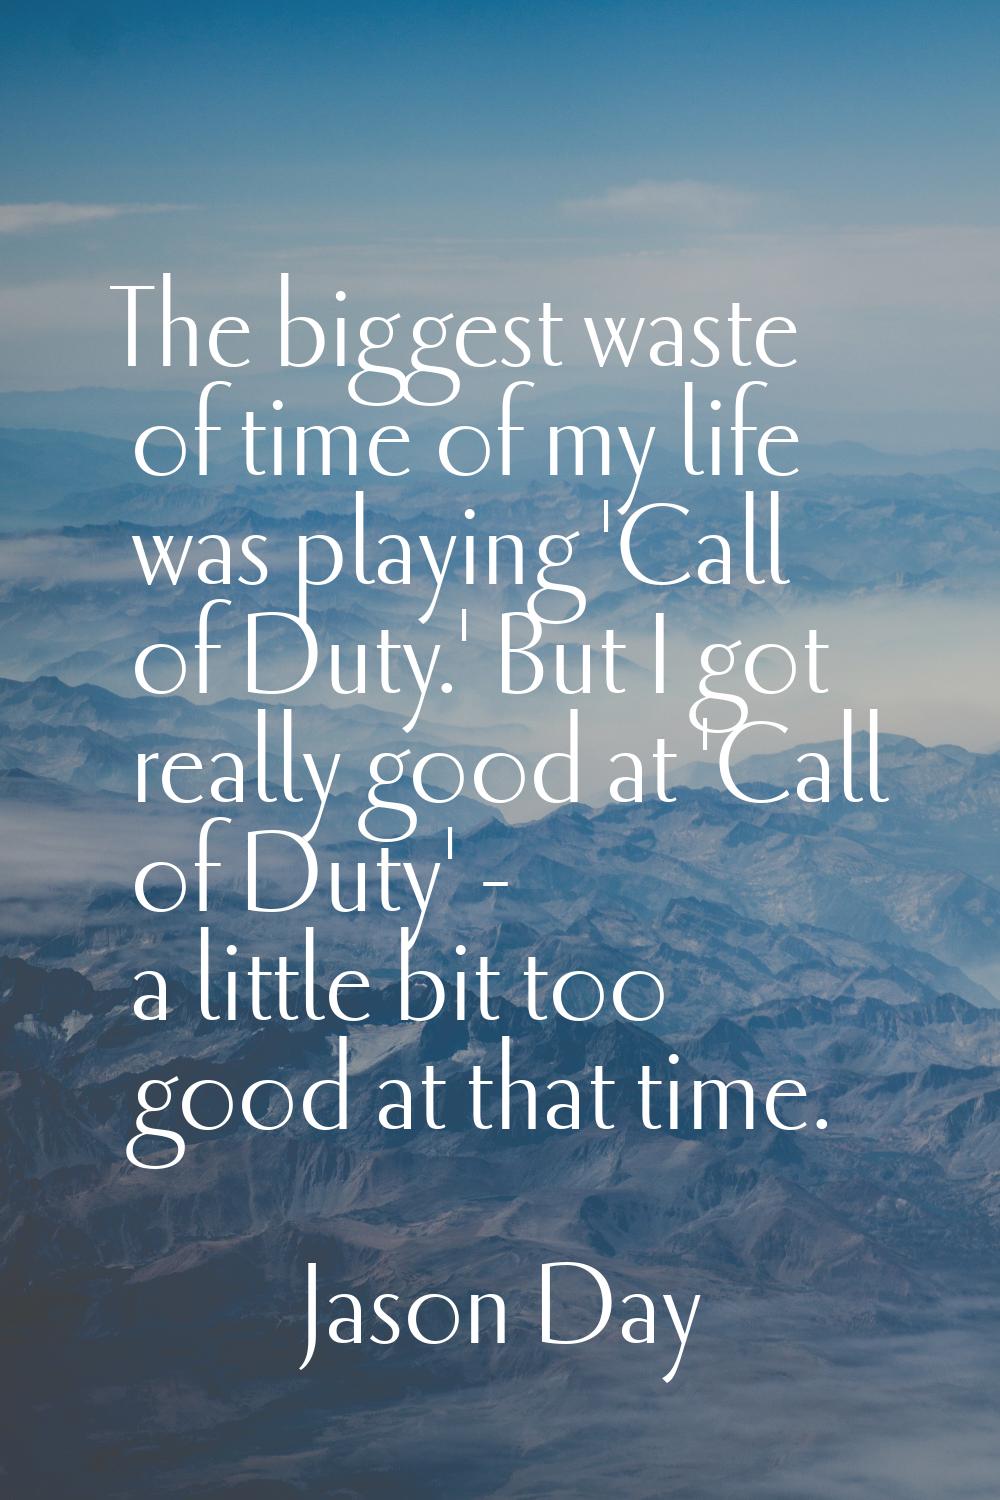 The biggest waste of time of my life was playing 'Call of Duty.' But I got really good at 'Call of 